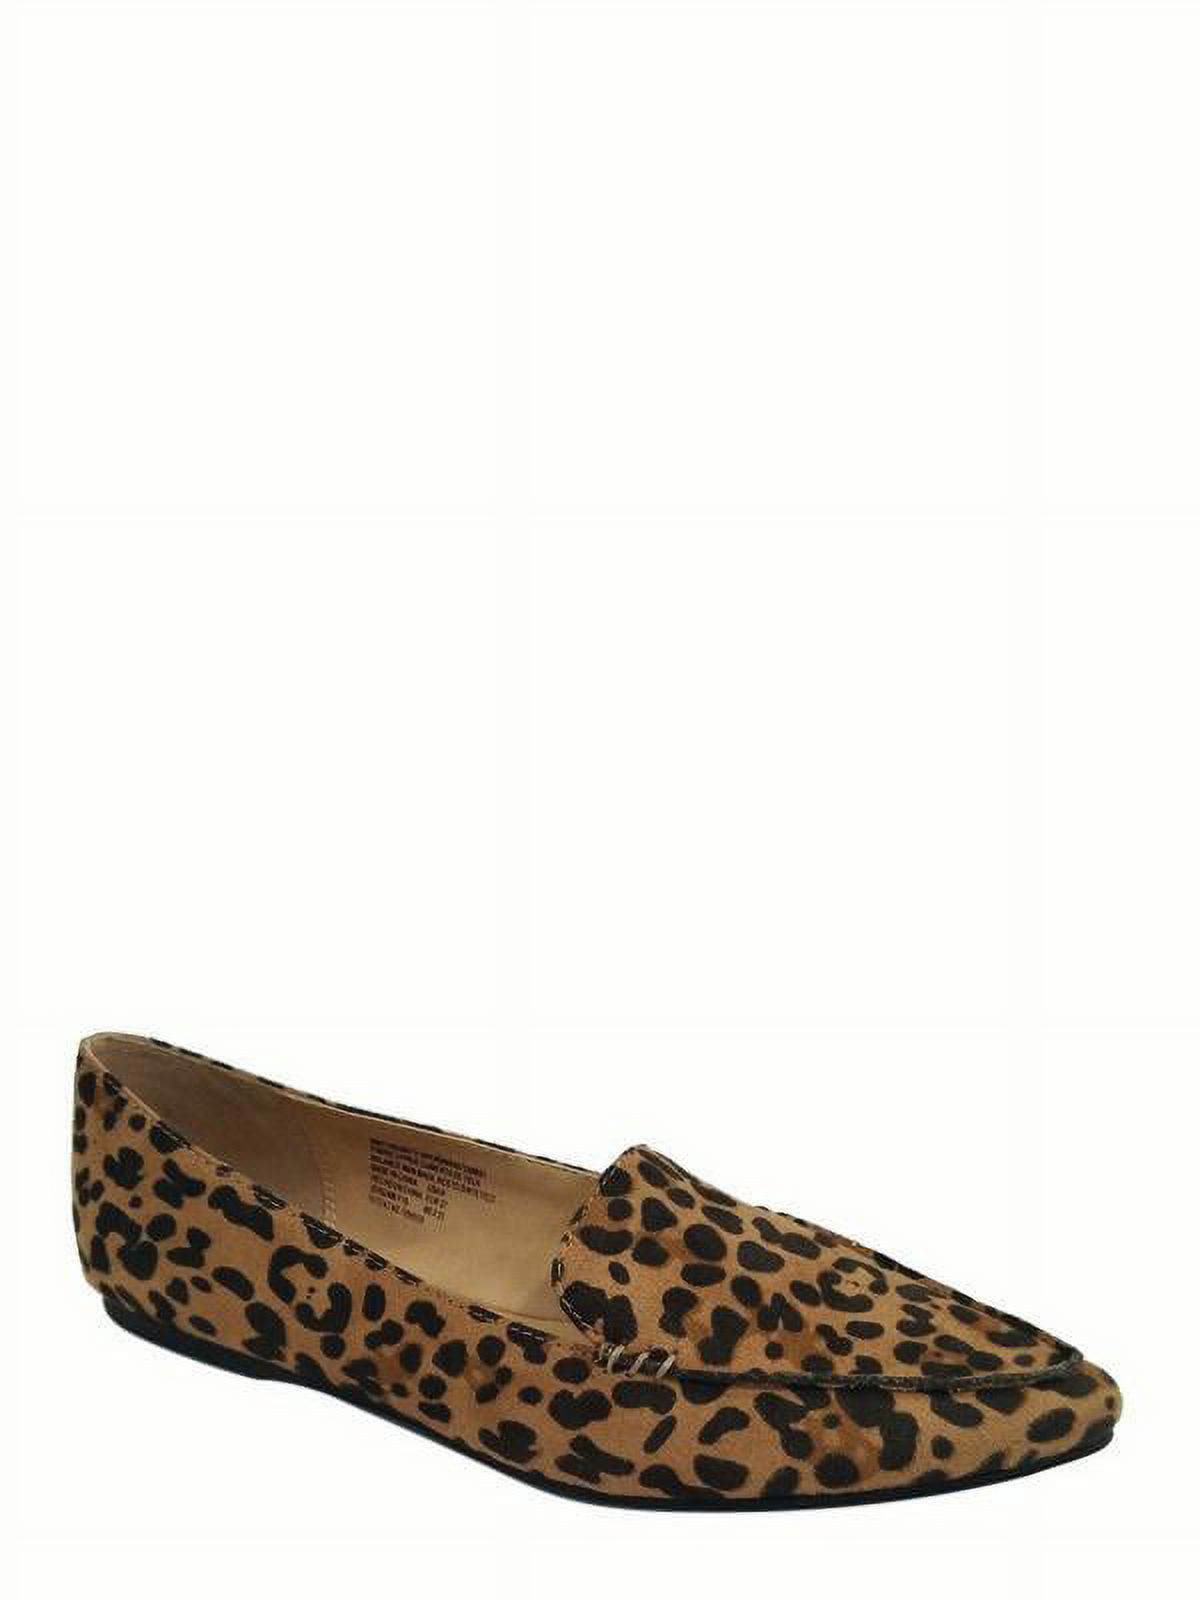 Time and Tru Women's Loafer - image 1 of 3